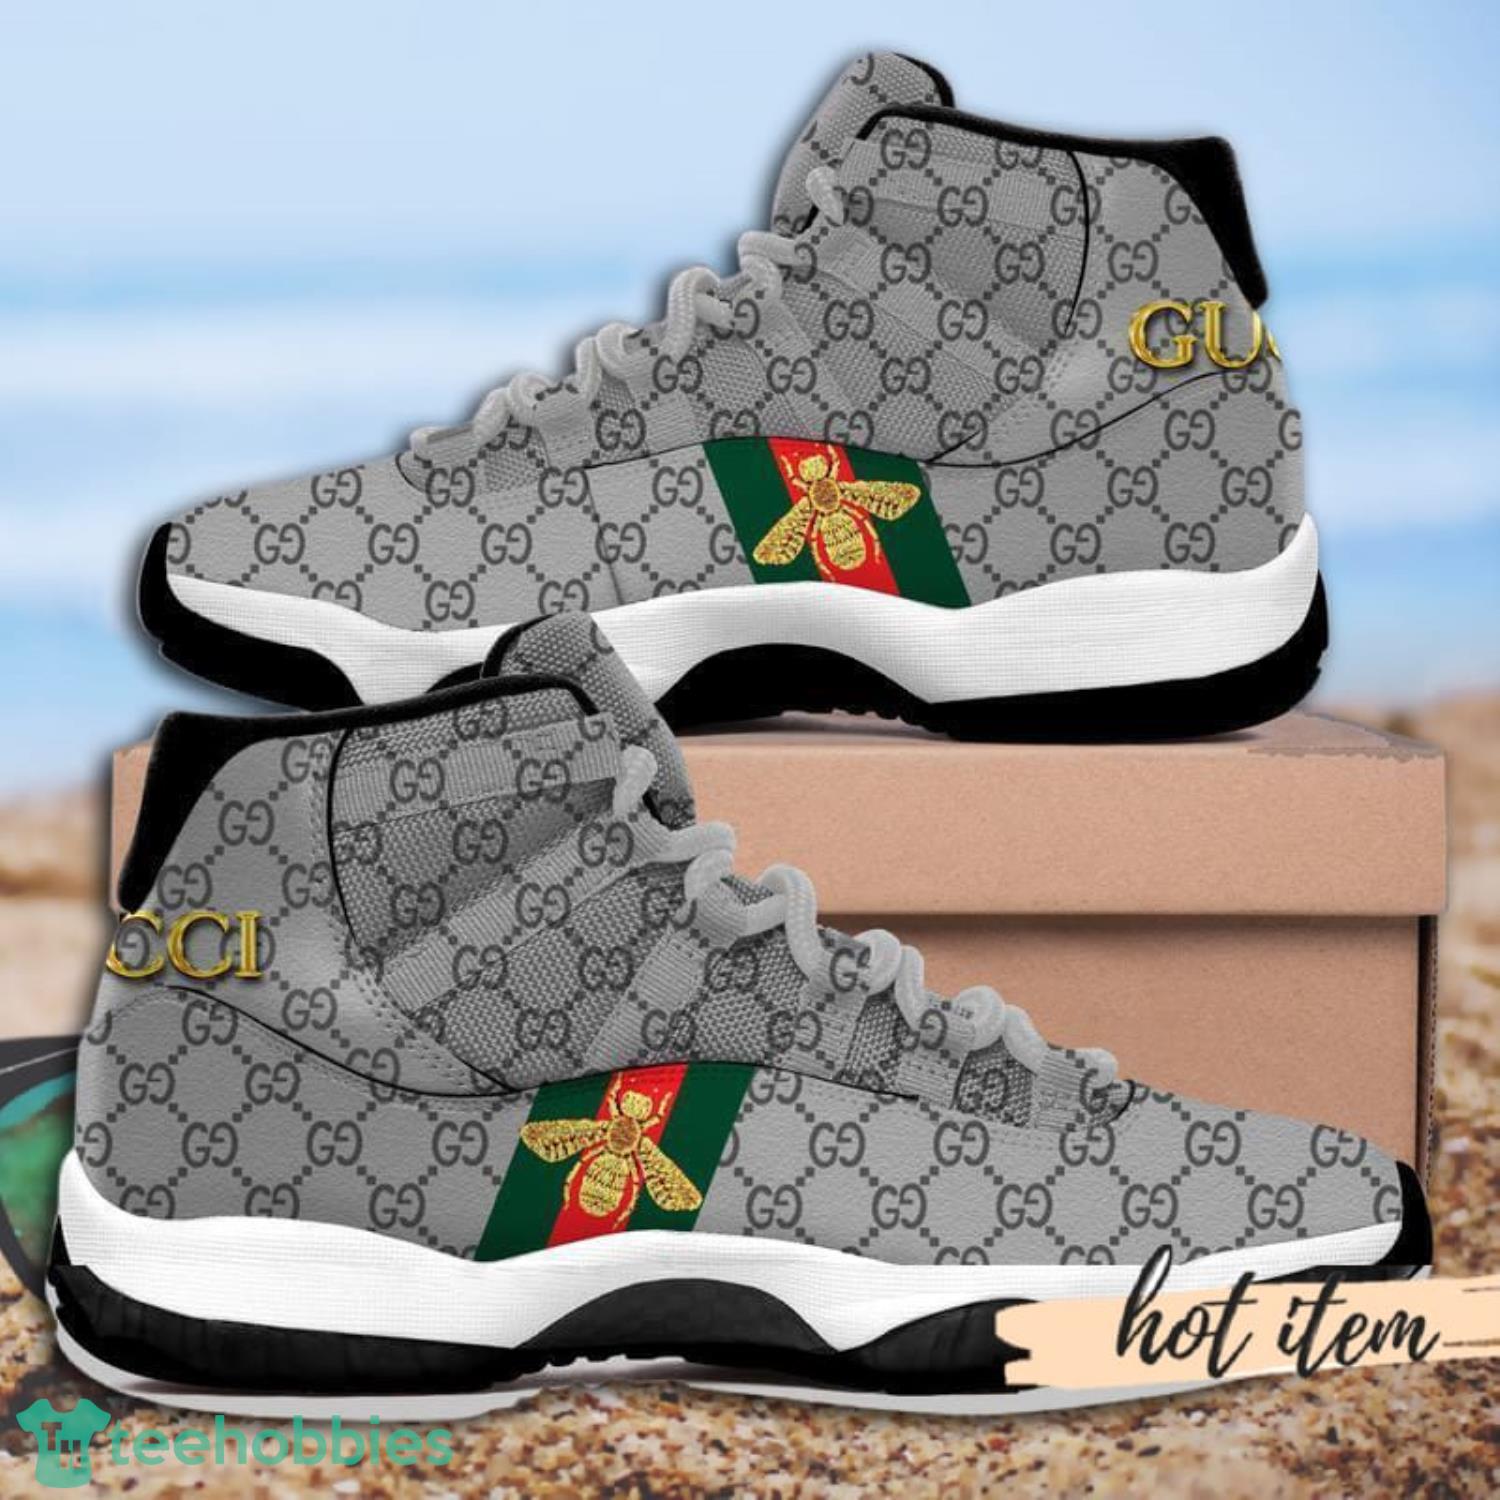 Grey Gucci Luxury Bee Air Jordan 11 Shoes Gucci Sneakers Gifts